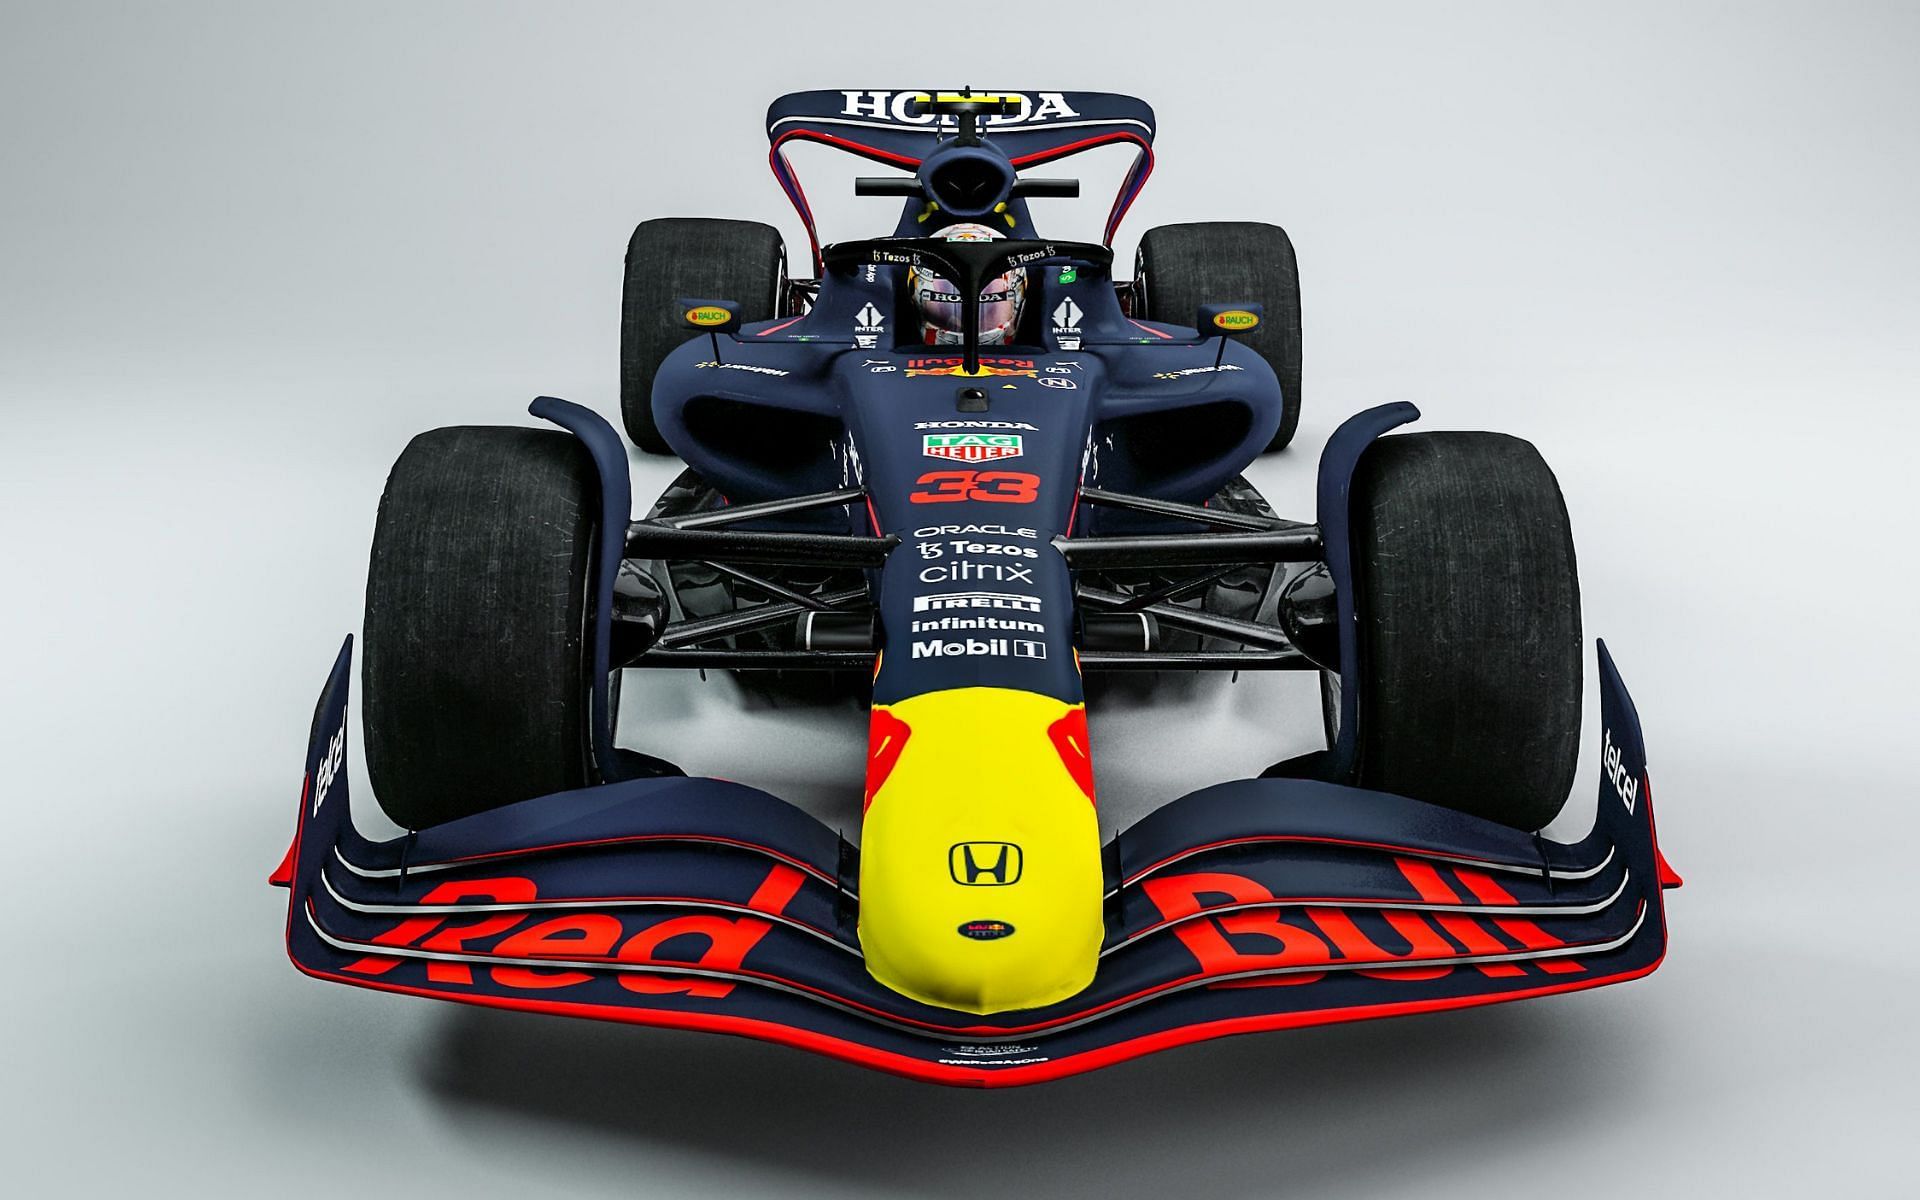 Red Bull 2022 concept livery. Courtesy: Twitter/@RedBullRacing